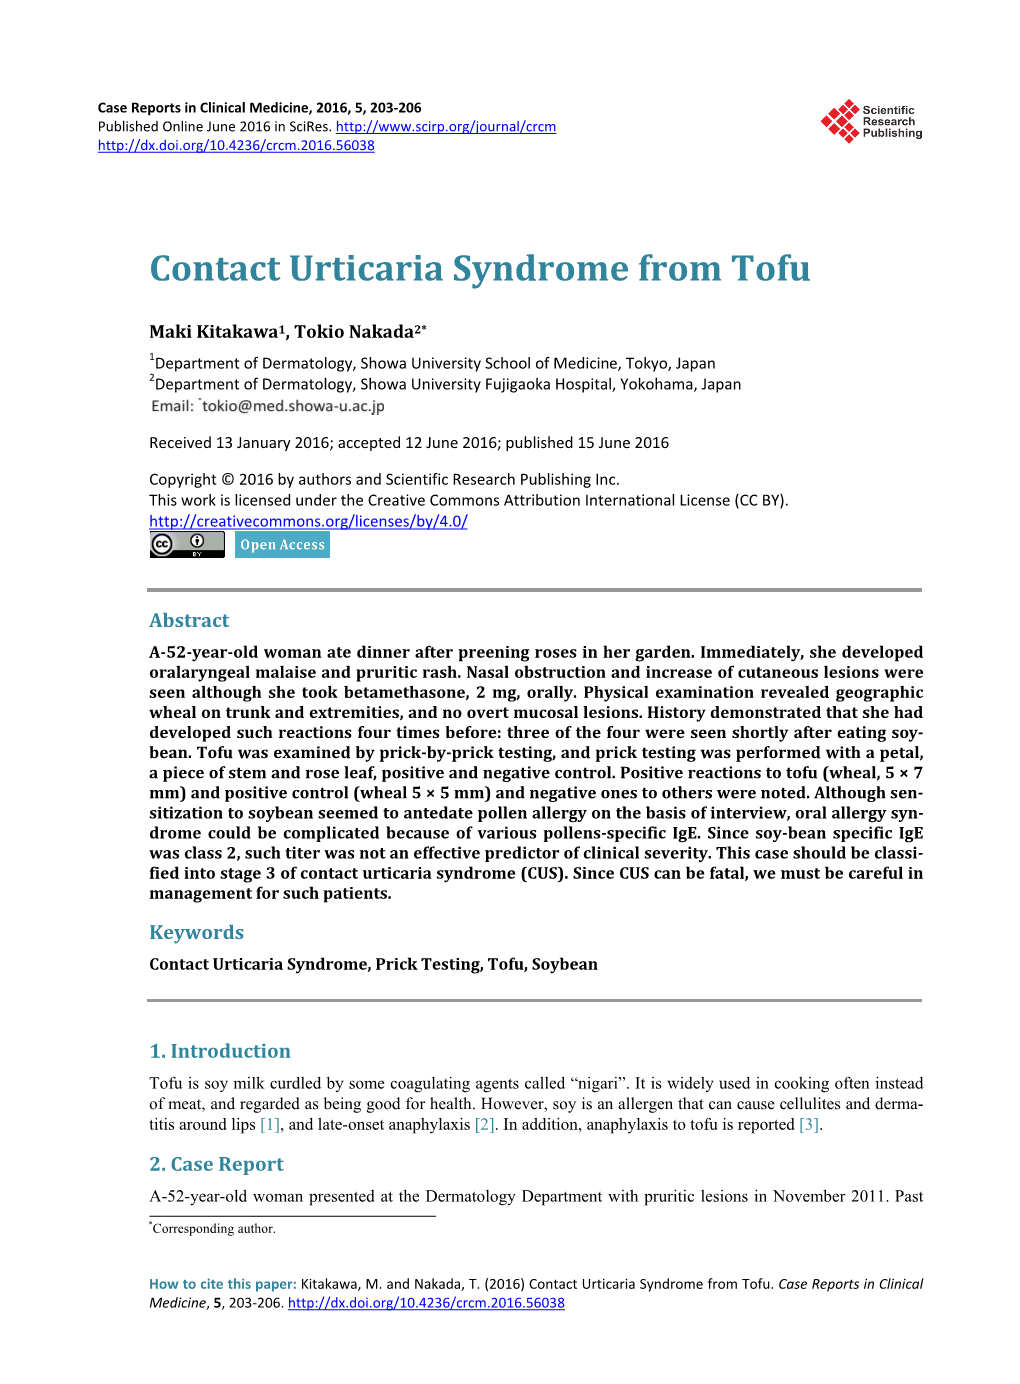 Contact Urticaria Syndrome from Tofu, Case Reports in Clinical Medicine